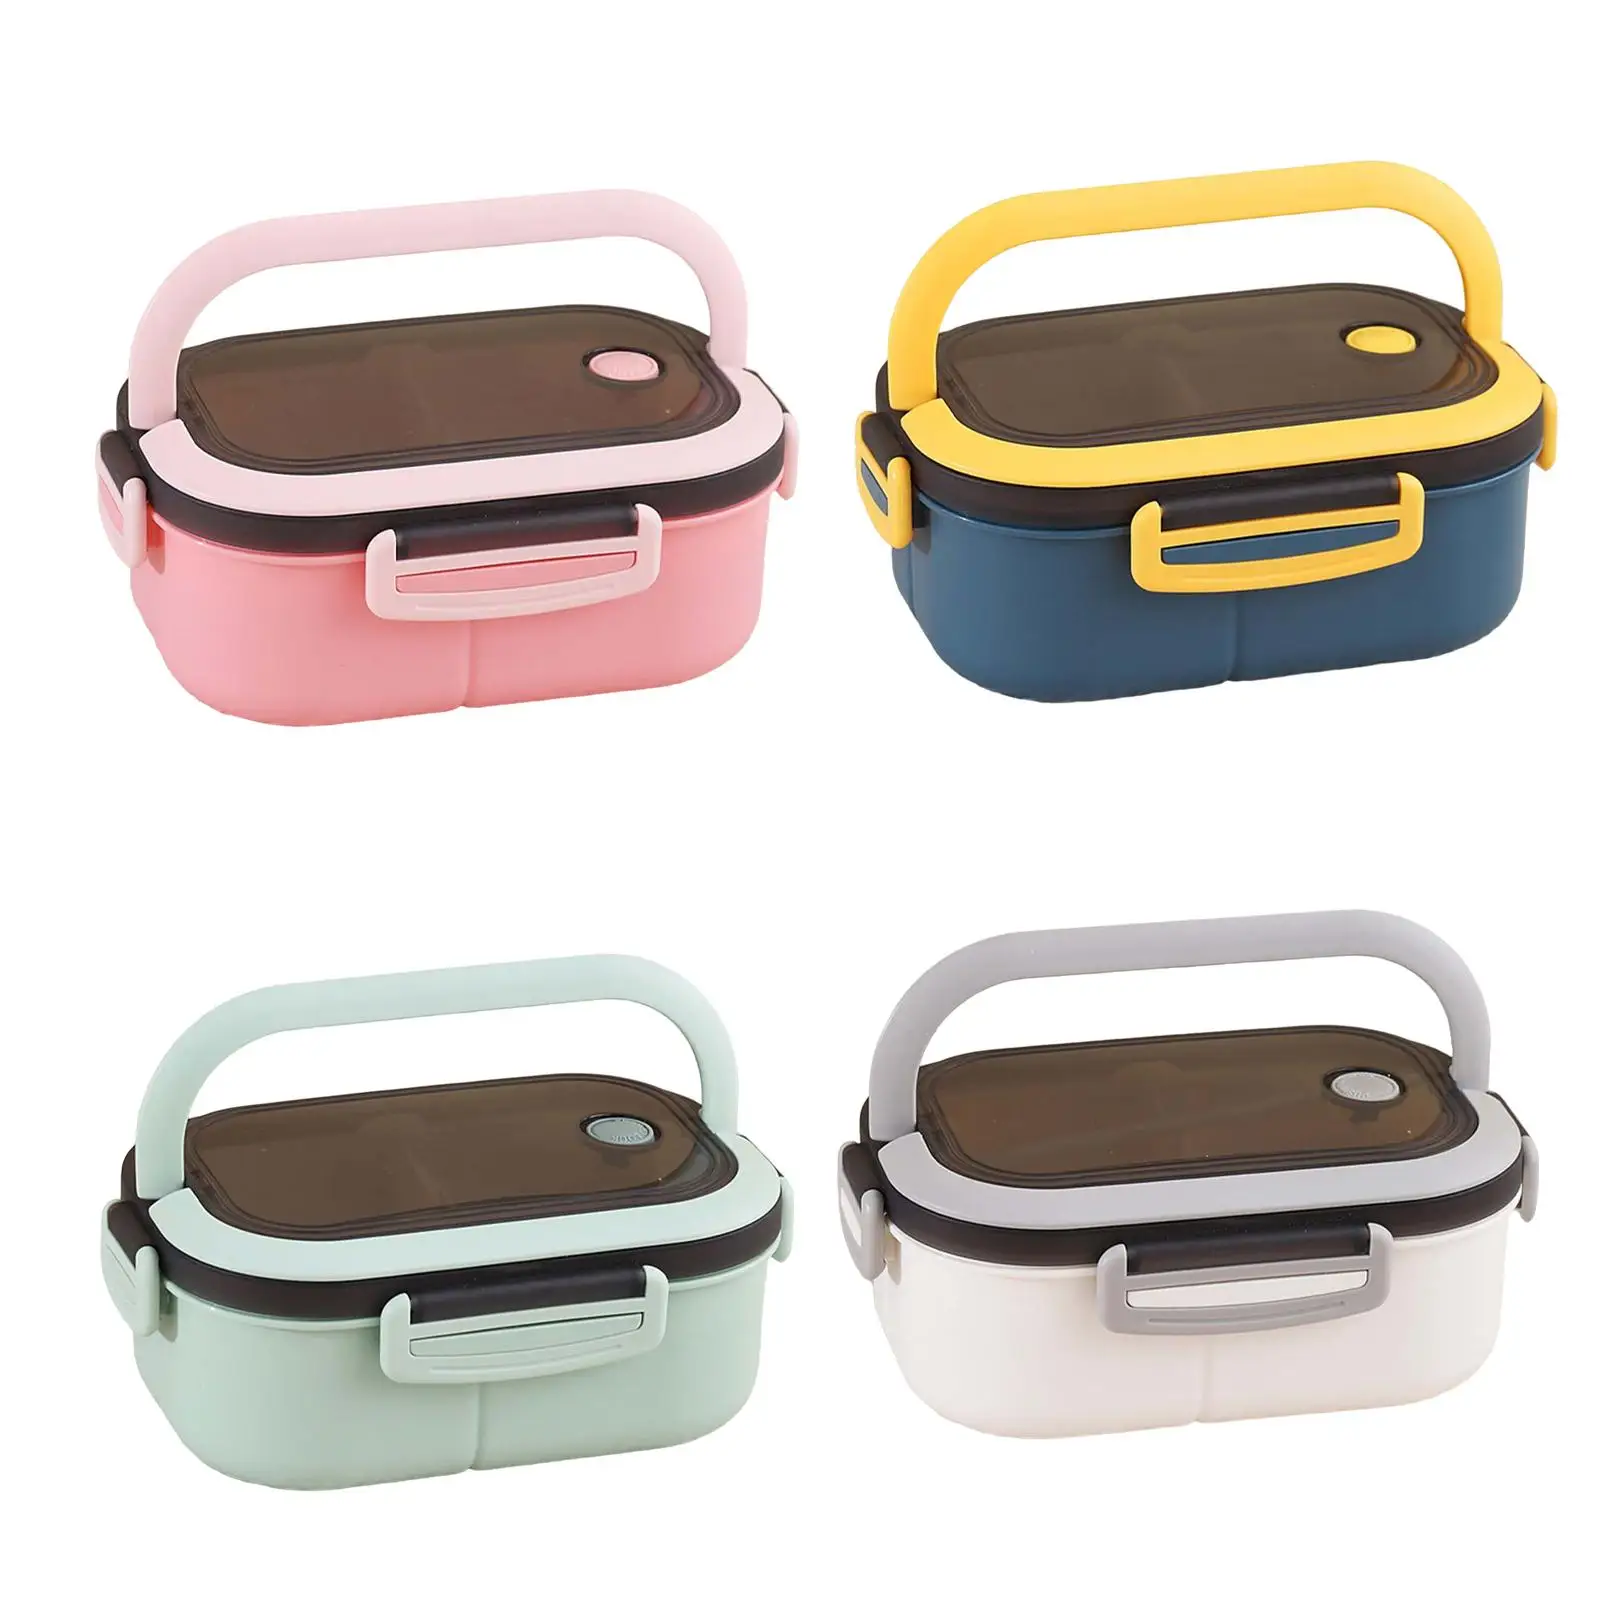 Airtight Lunchbox Hot or Cold Food Storage 3 Divided Compartments with Handle 800ml Bento Box for Boys Teen Girls Office School